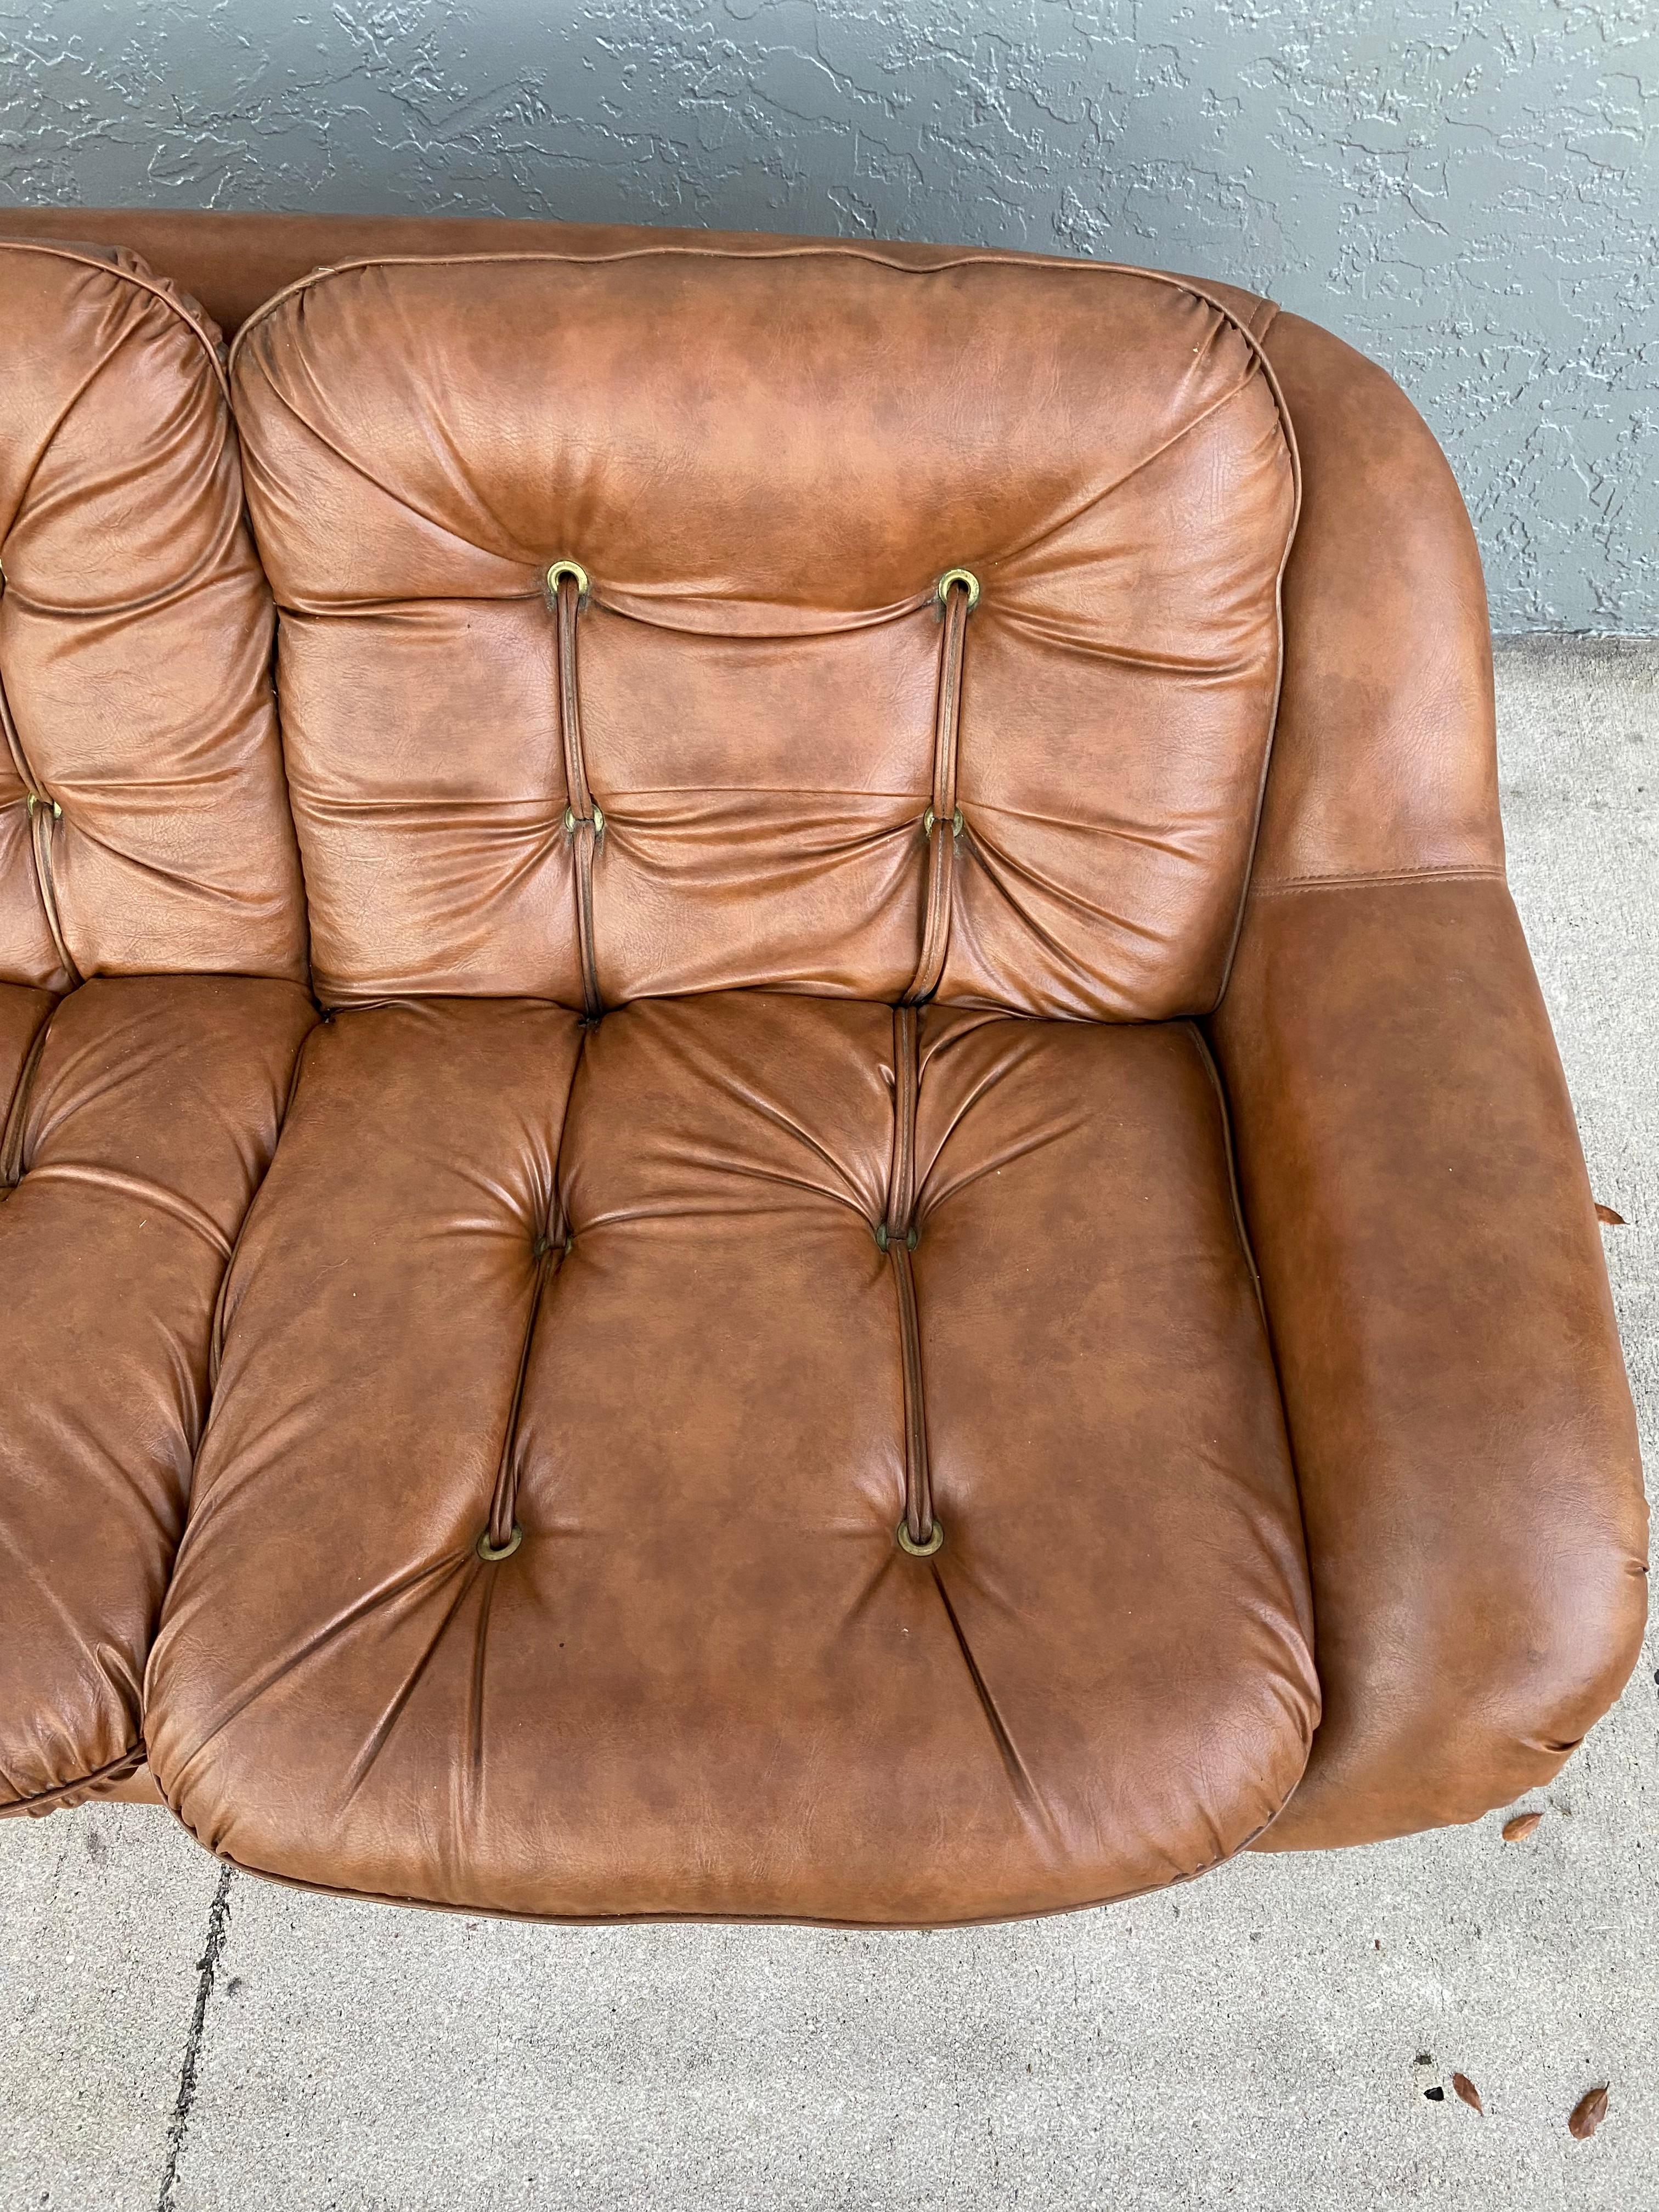 1970s Space Age Baseball Glove Curved Sofa Loveseat For Sale 3